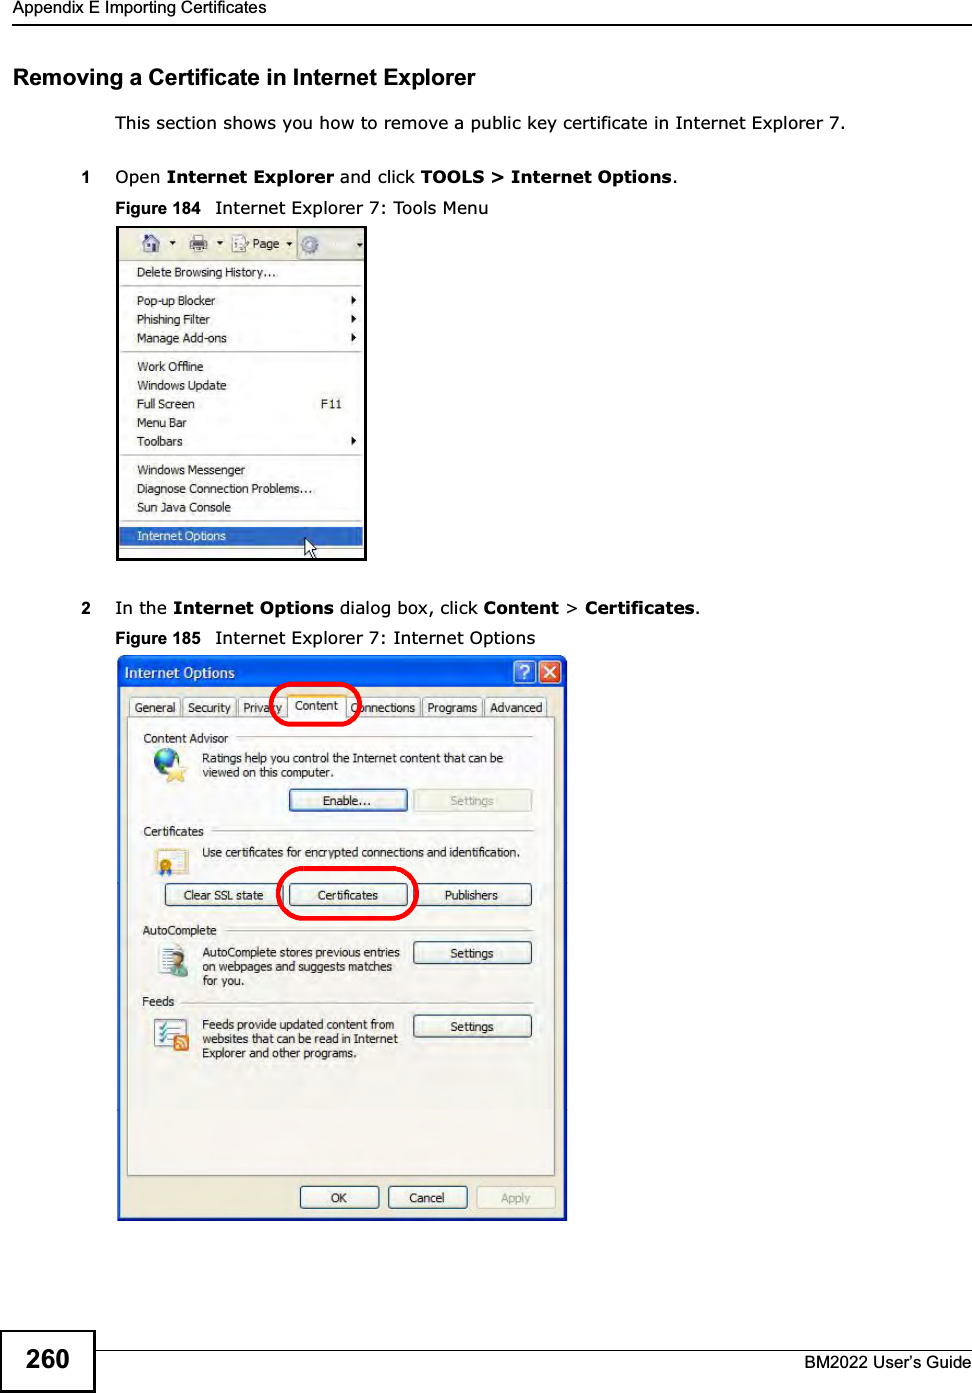 Appendix E Importing CertificatesBM2022 Users Guide260Removing a Certificate in Internet ExplorerThis section shows you how to remove a public key certificate in Internet Explorer 7.1Open Internet Explorer and click TOOLS &gt; Internet Options.Figure 184   Internet Explorer 7: Tools Menu2In the Internet Options dialog box, click Content &gt; Certificates.Figure 185   Internet Explorer 7: Internet Options